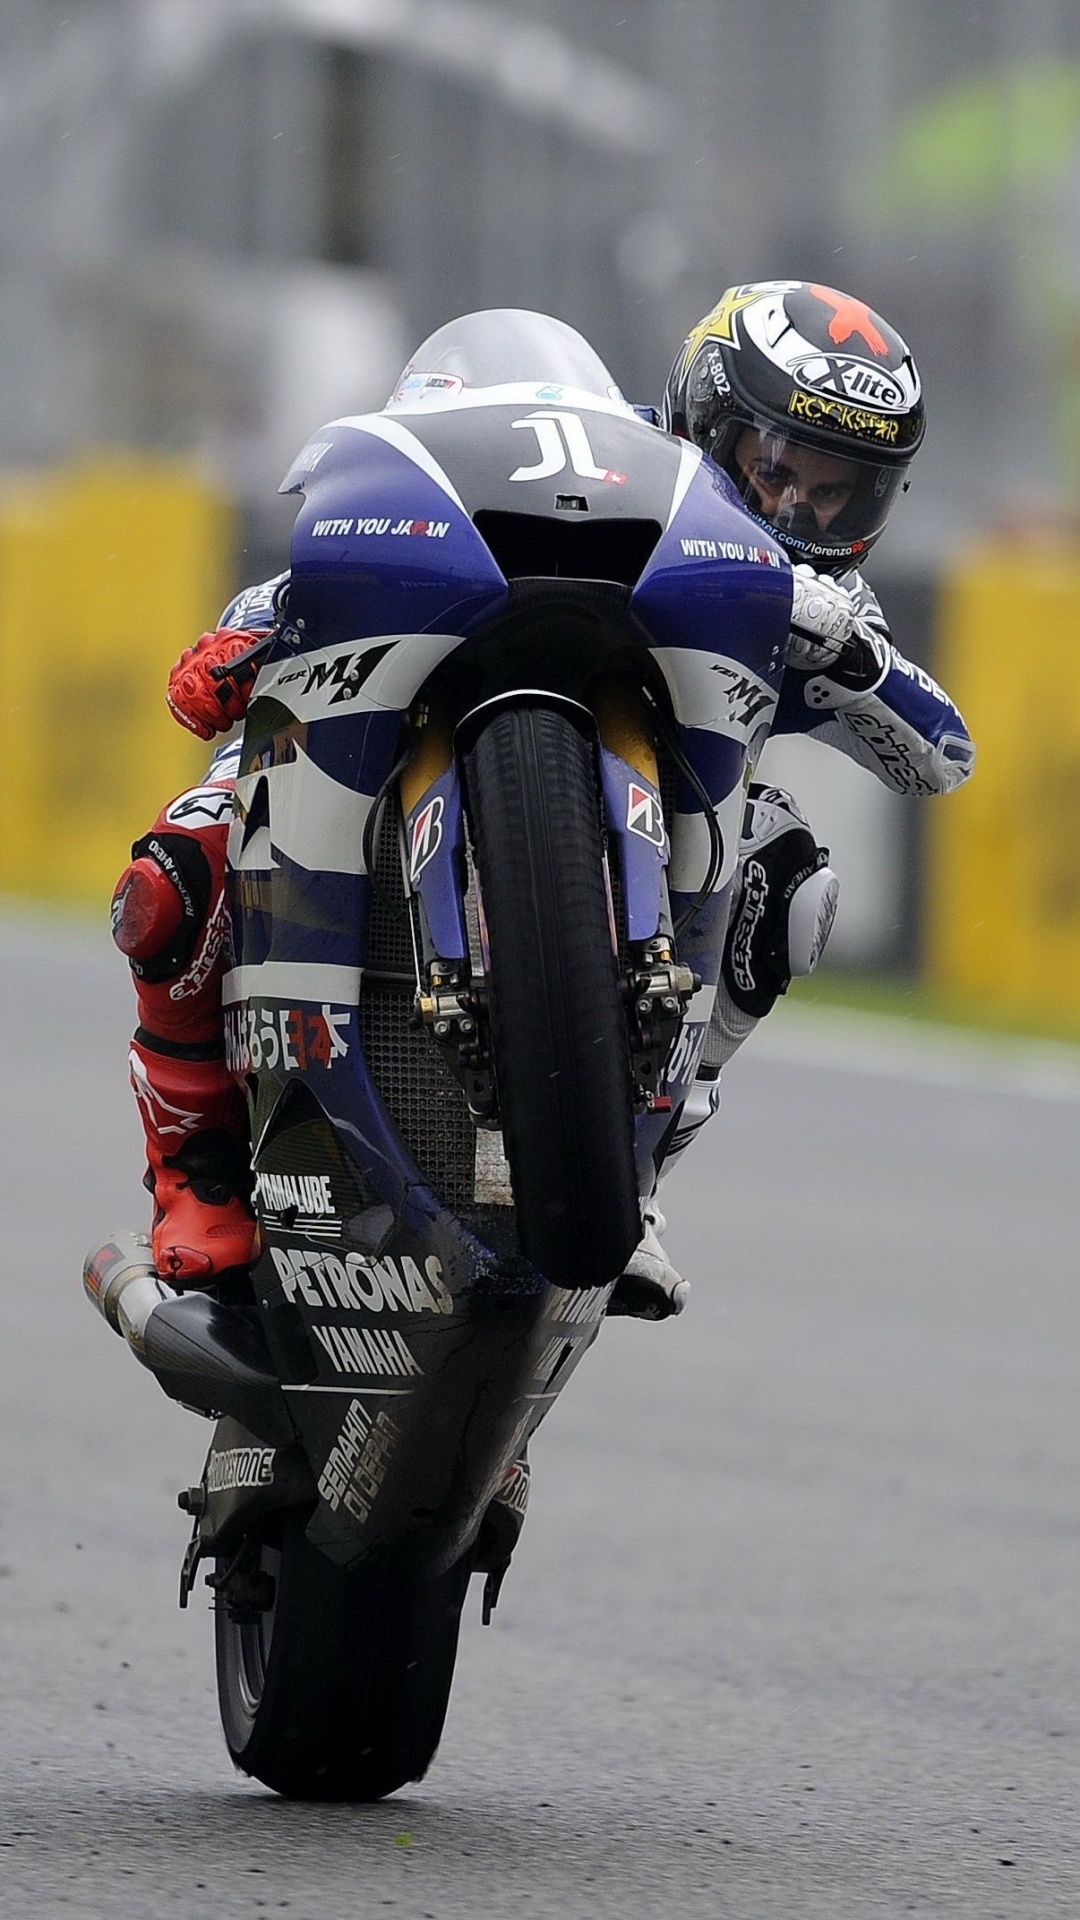 Motorcycle Racing: Wheelie, Remarkable Driving Skill, Extreme Sports, Yamaha Sportsbike. 1080x1920 Full HD Background.